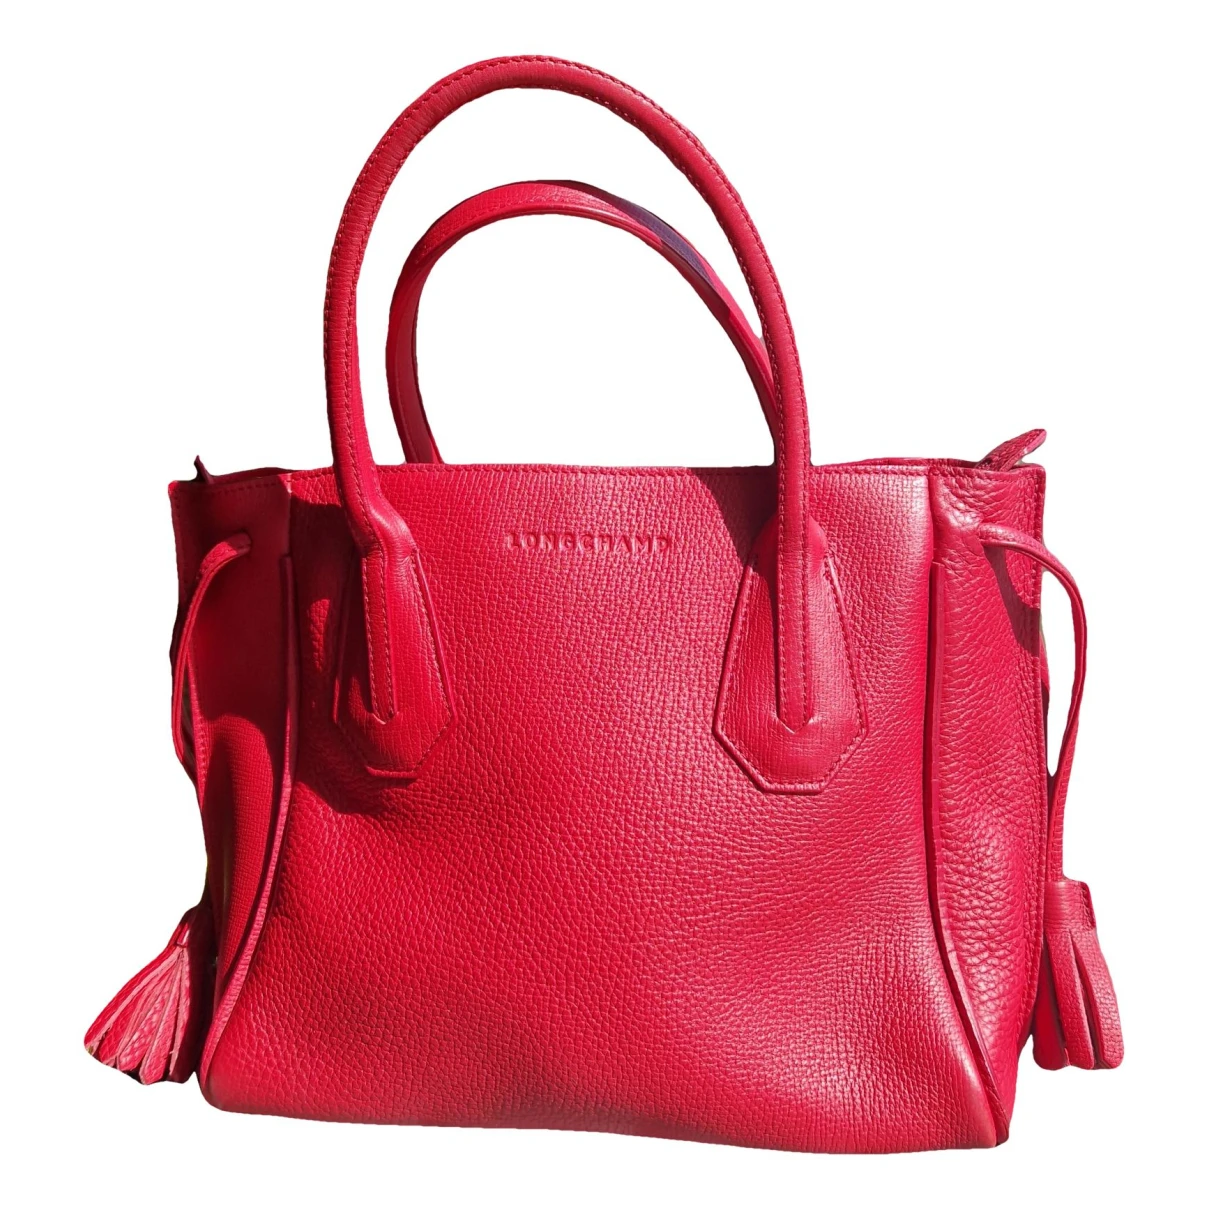 Pre-owned Longchamp Penelope Leather Handbag In Red